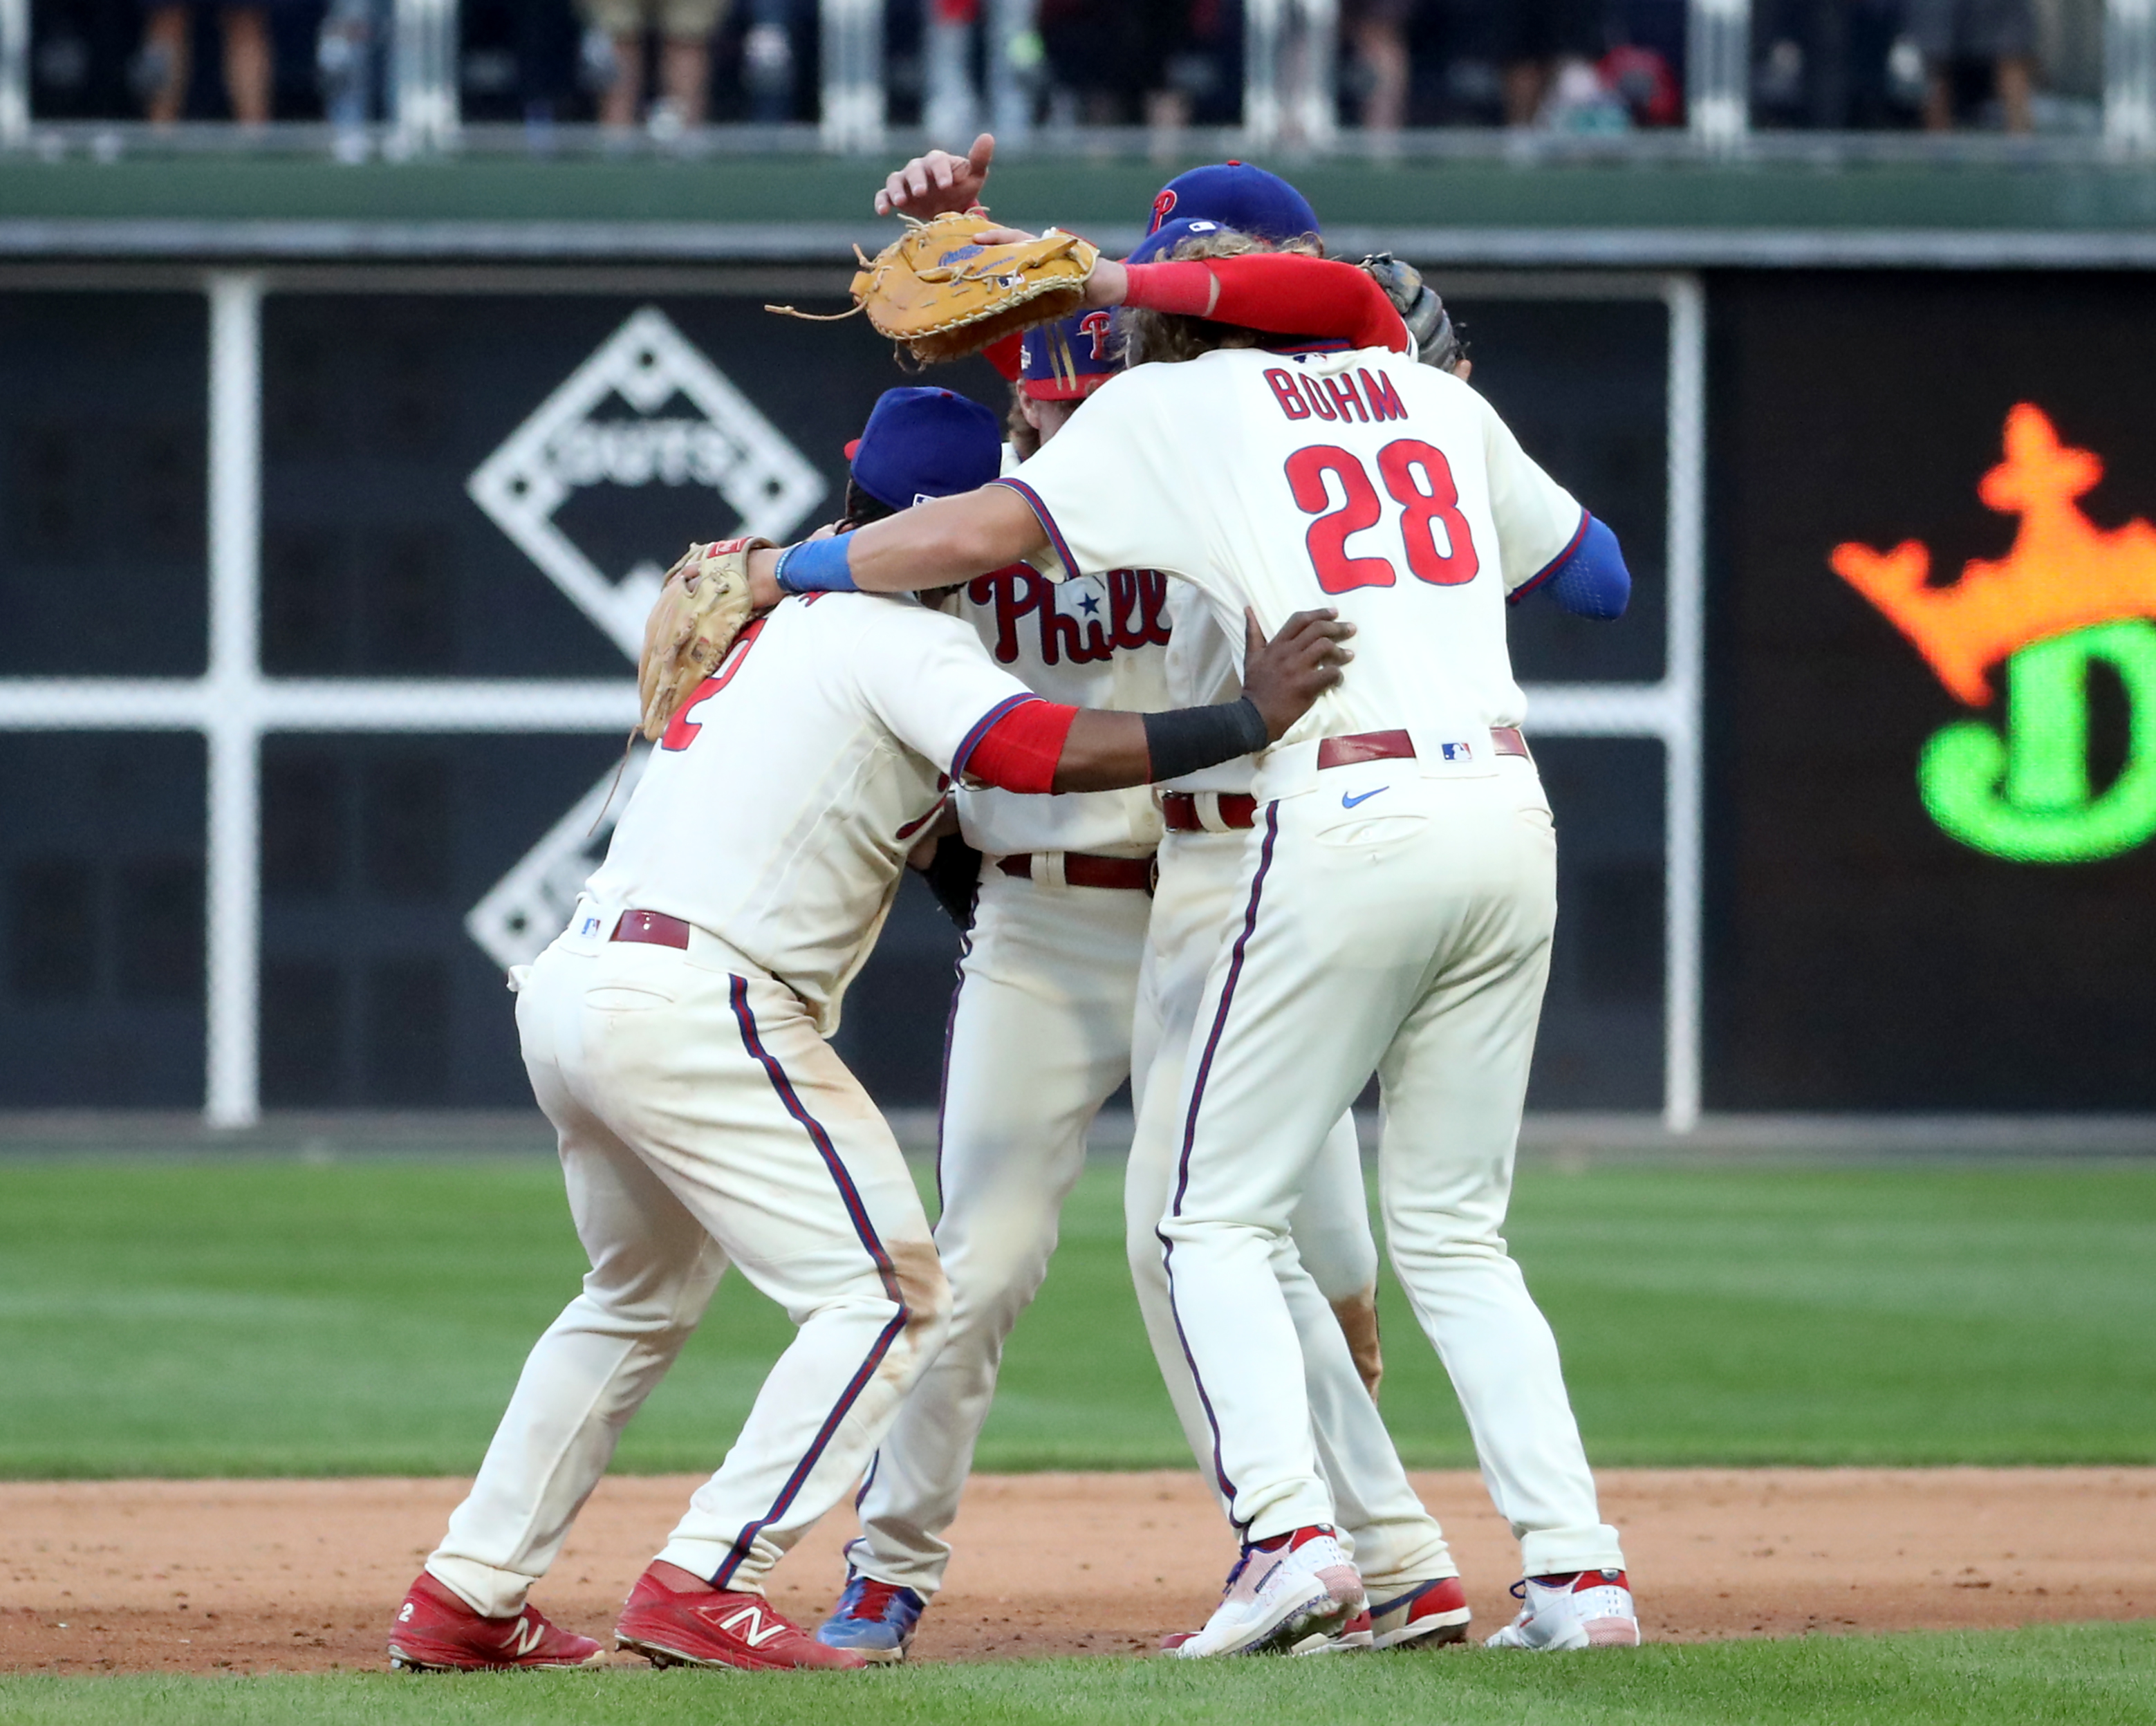 Phillies NLCS tickets: The cheapest tickets available for